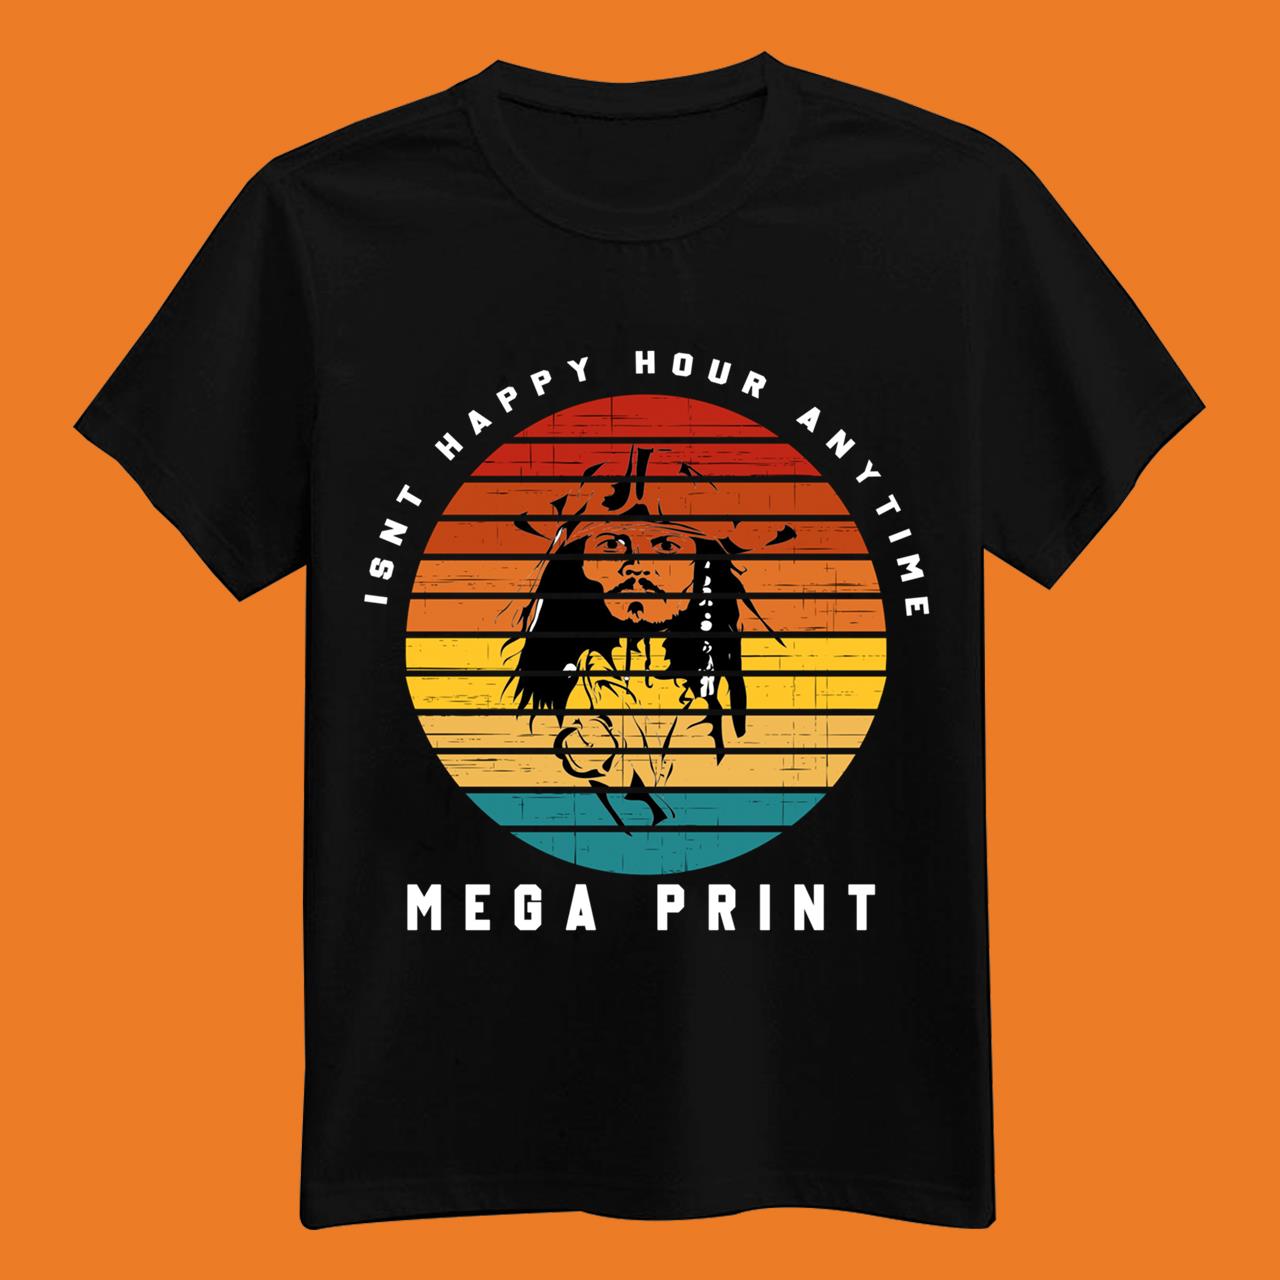 Is’nt Happy Hour Anytime Mega Print Classic T-Shirt